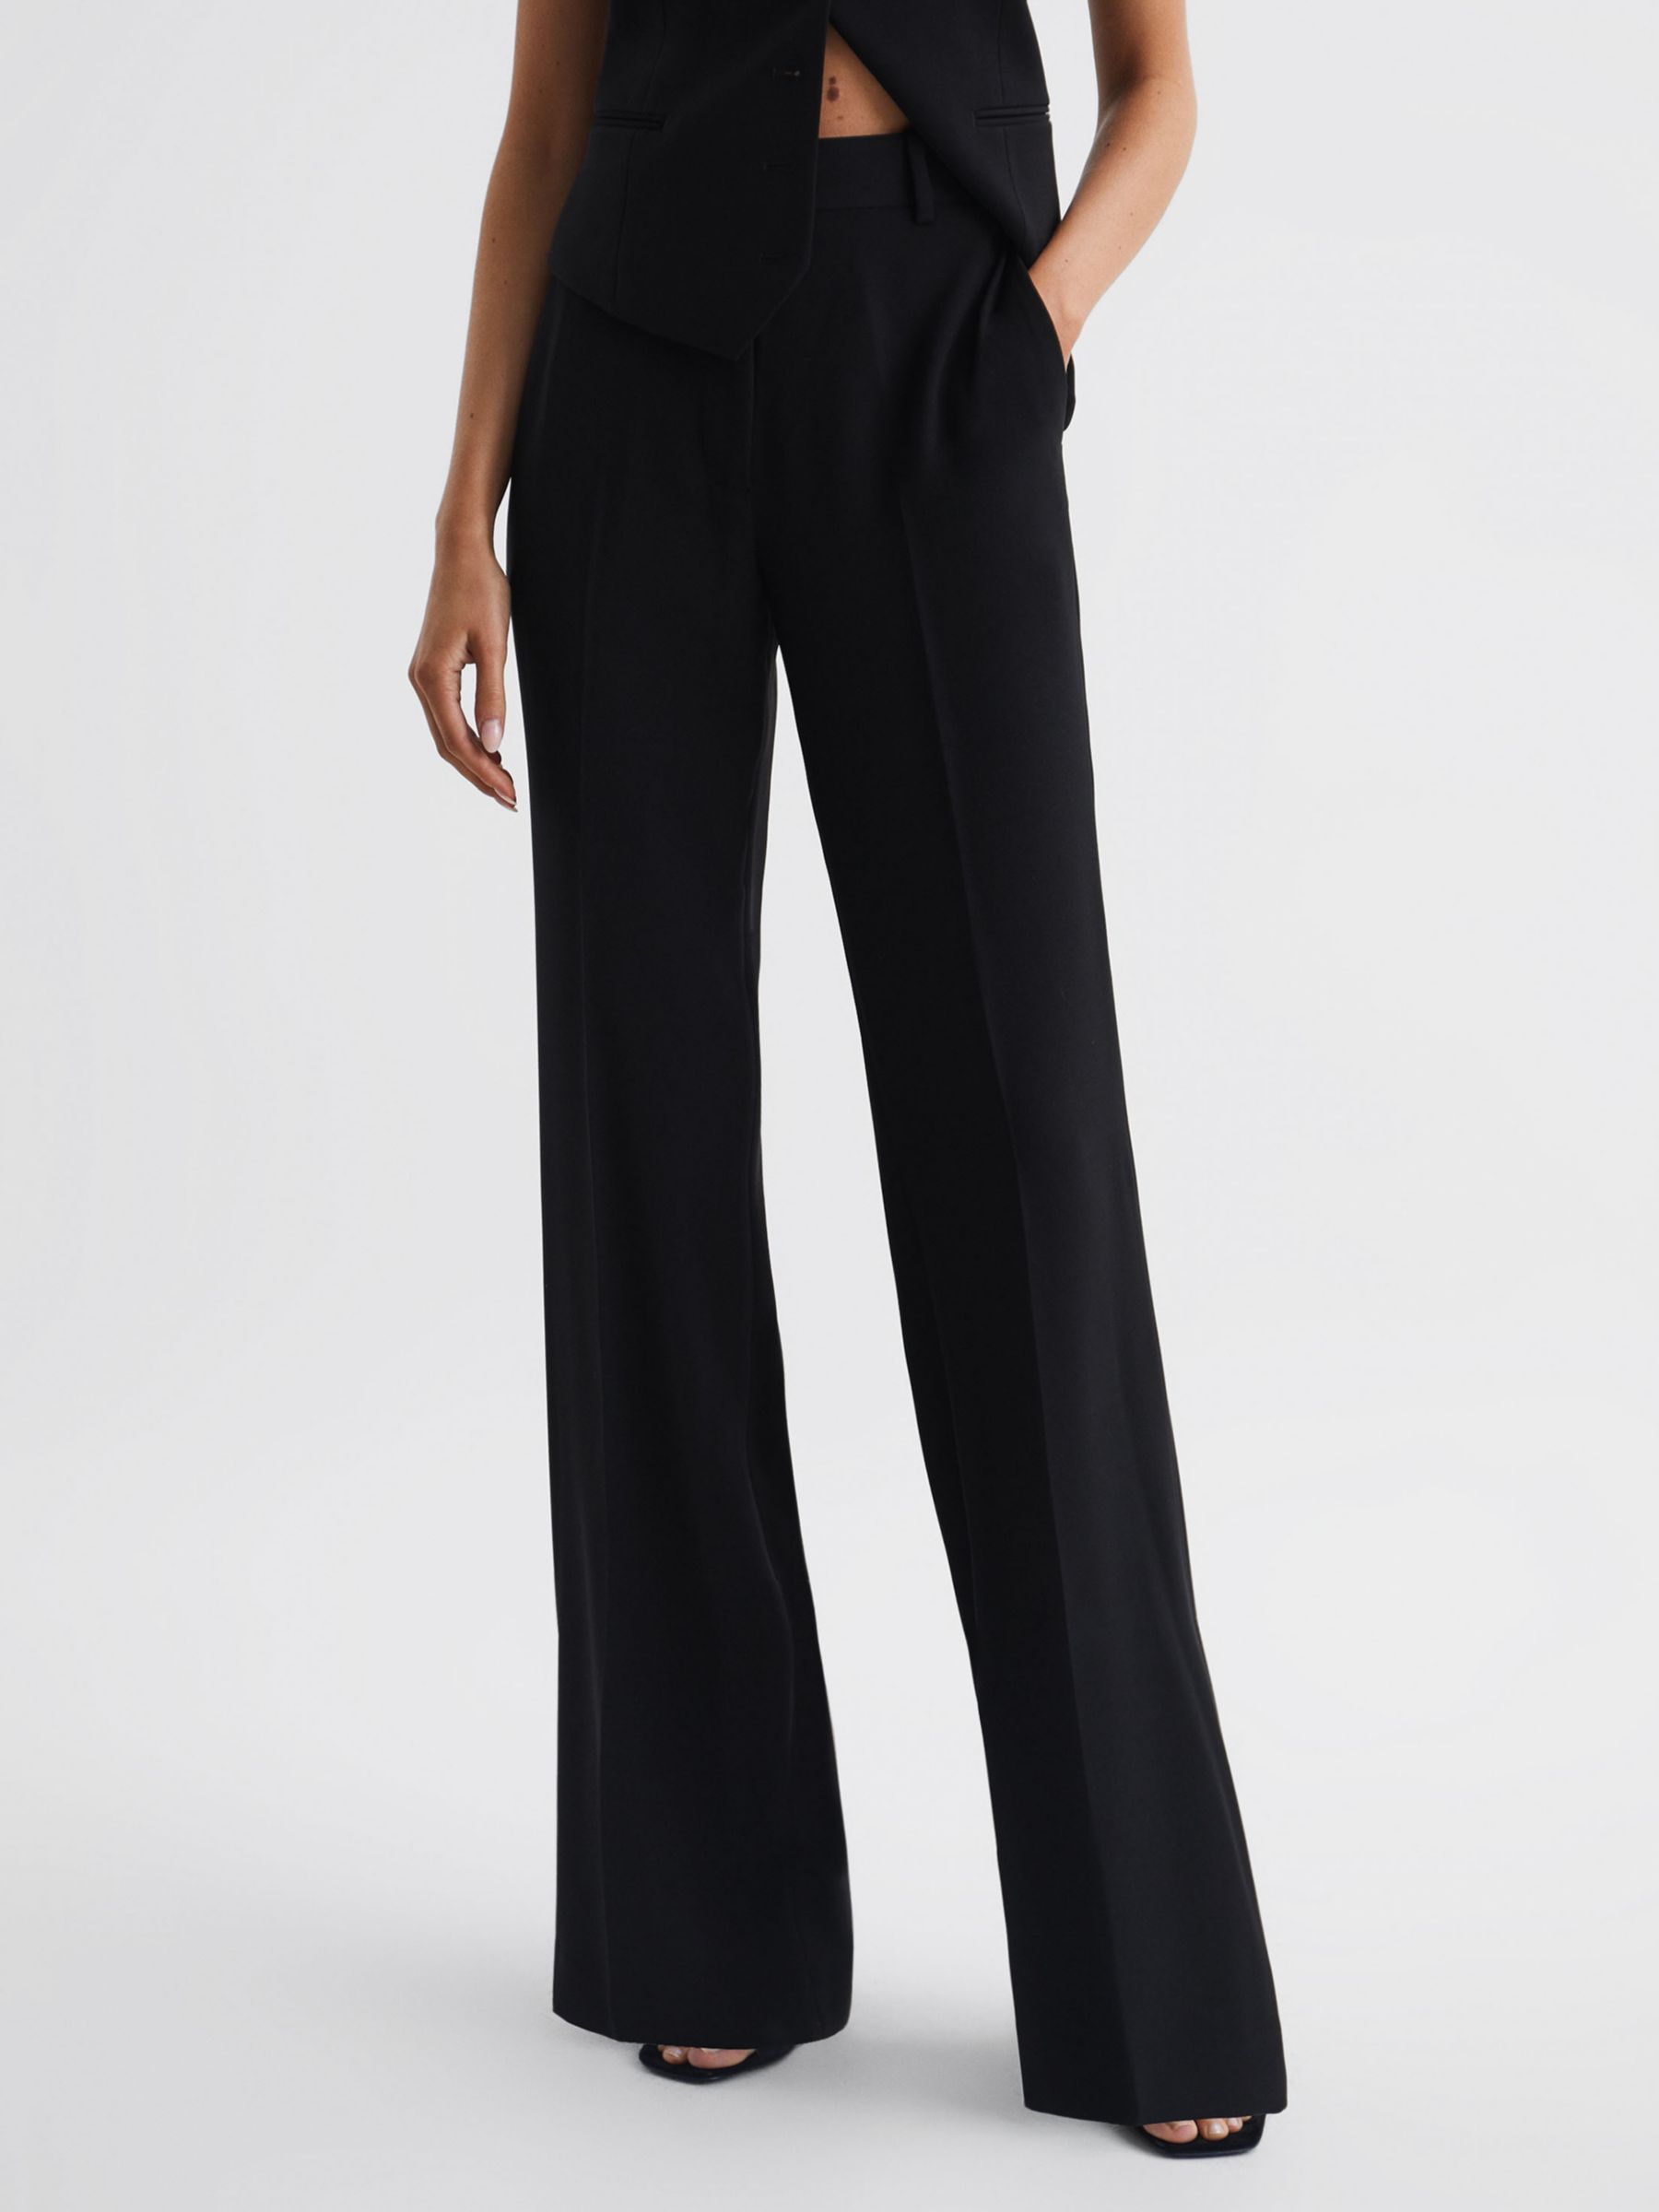 Reiss Margeaux Tailored Trousers, Black at John Lewis & Partners